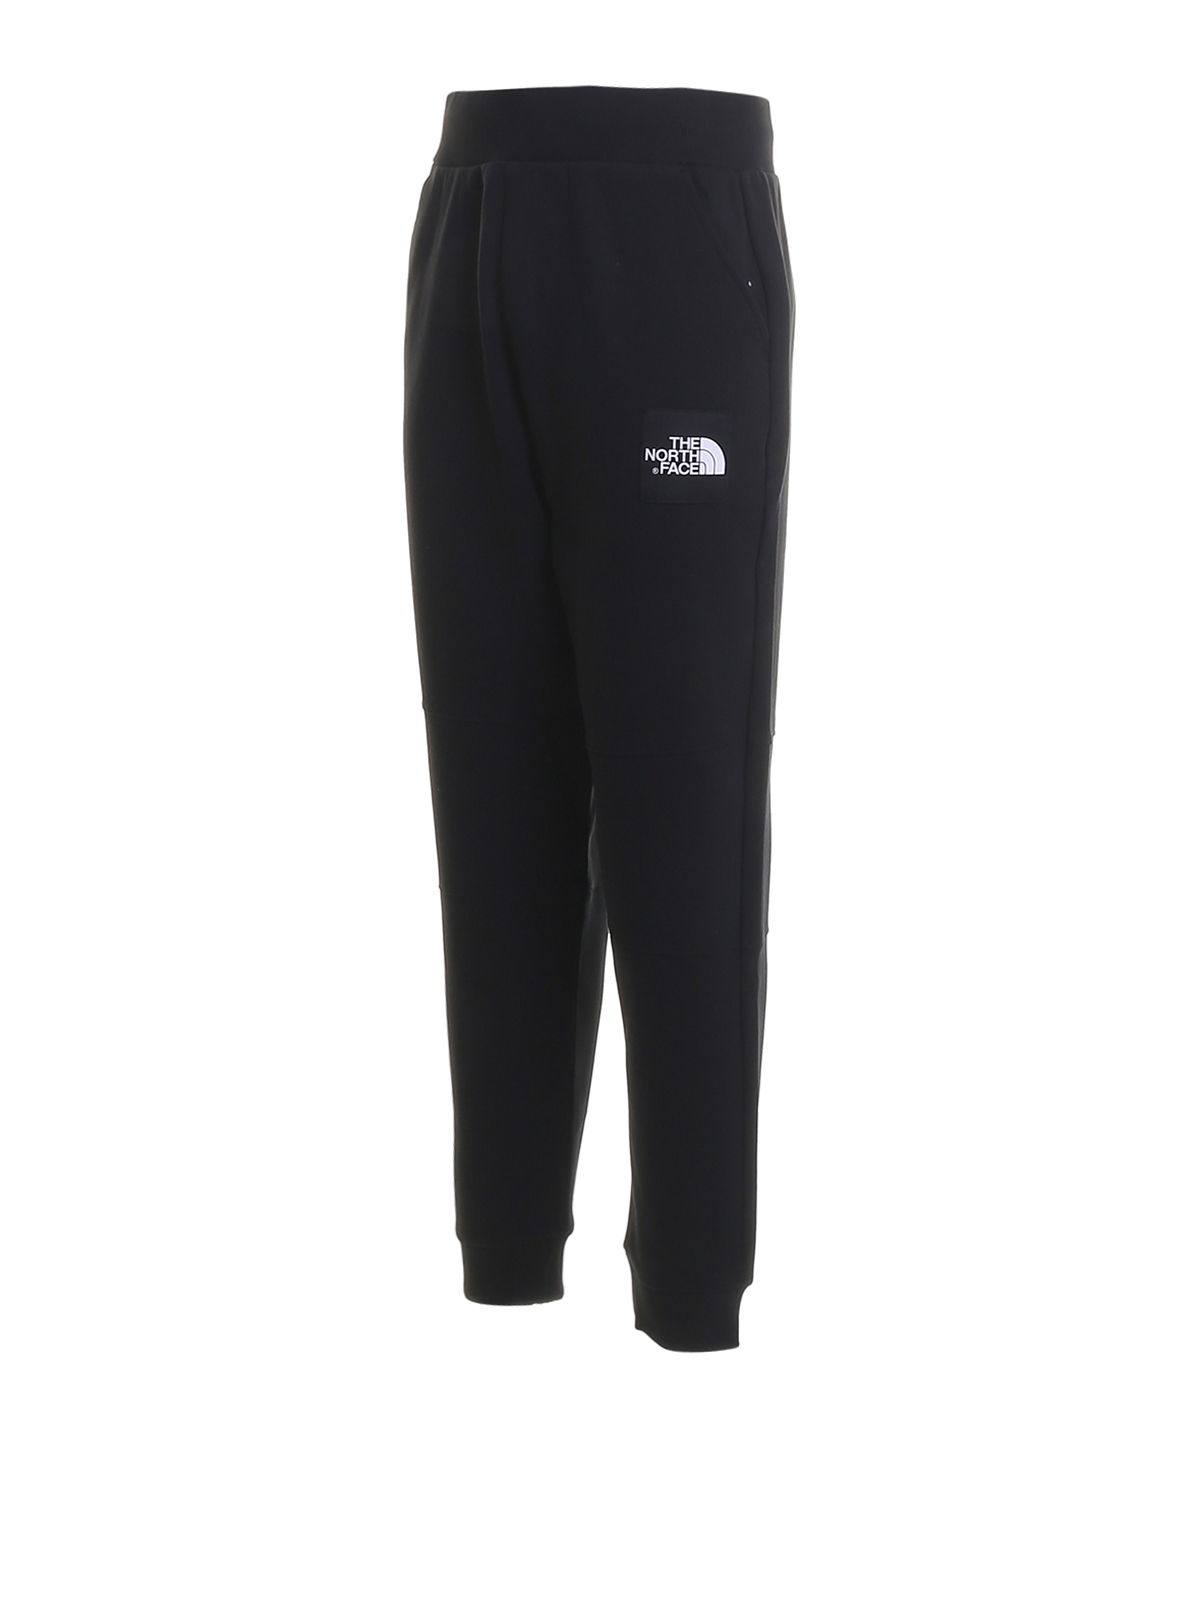 The North Face - Never Stop Exploring jogger pants - tracksuit bottoms ...